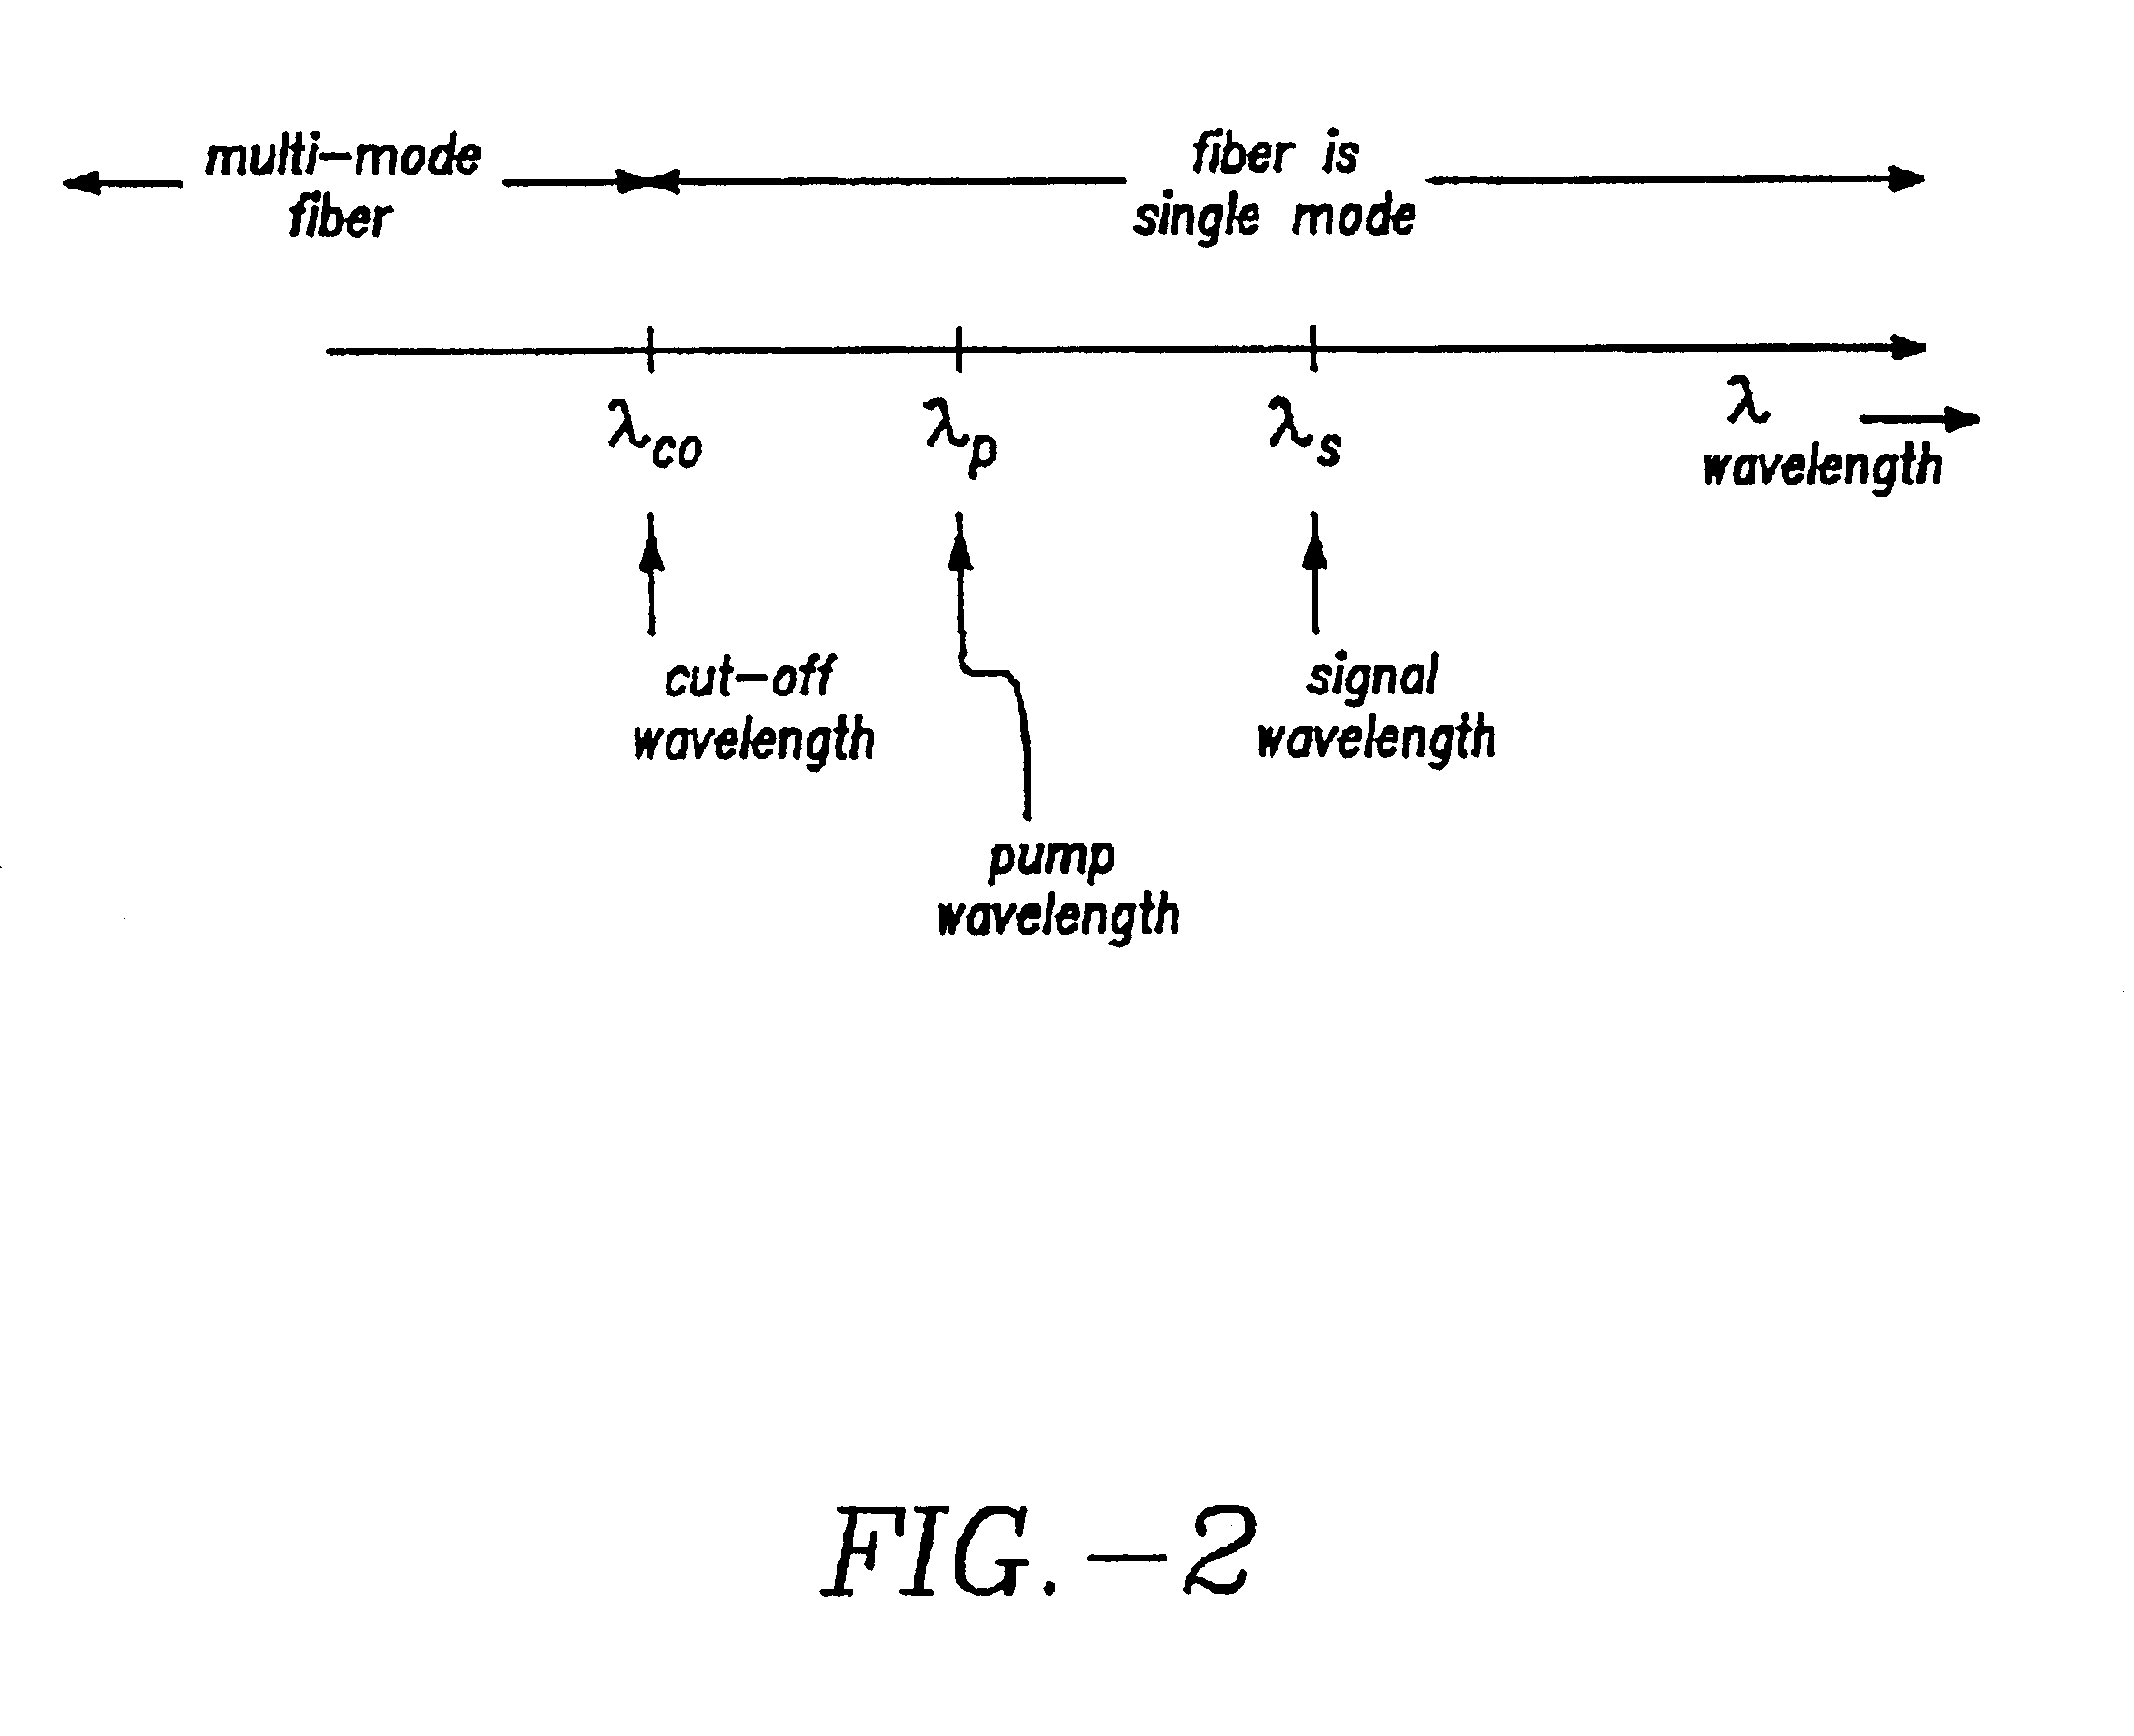 Multi-stage optical amplifier and broadband communication system